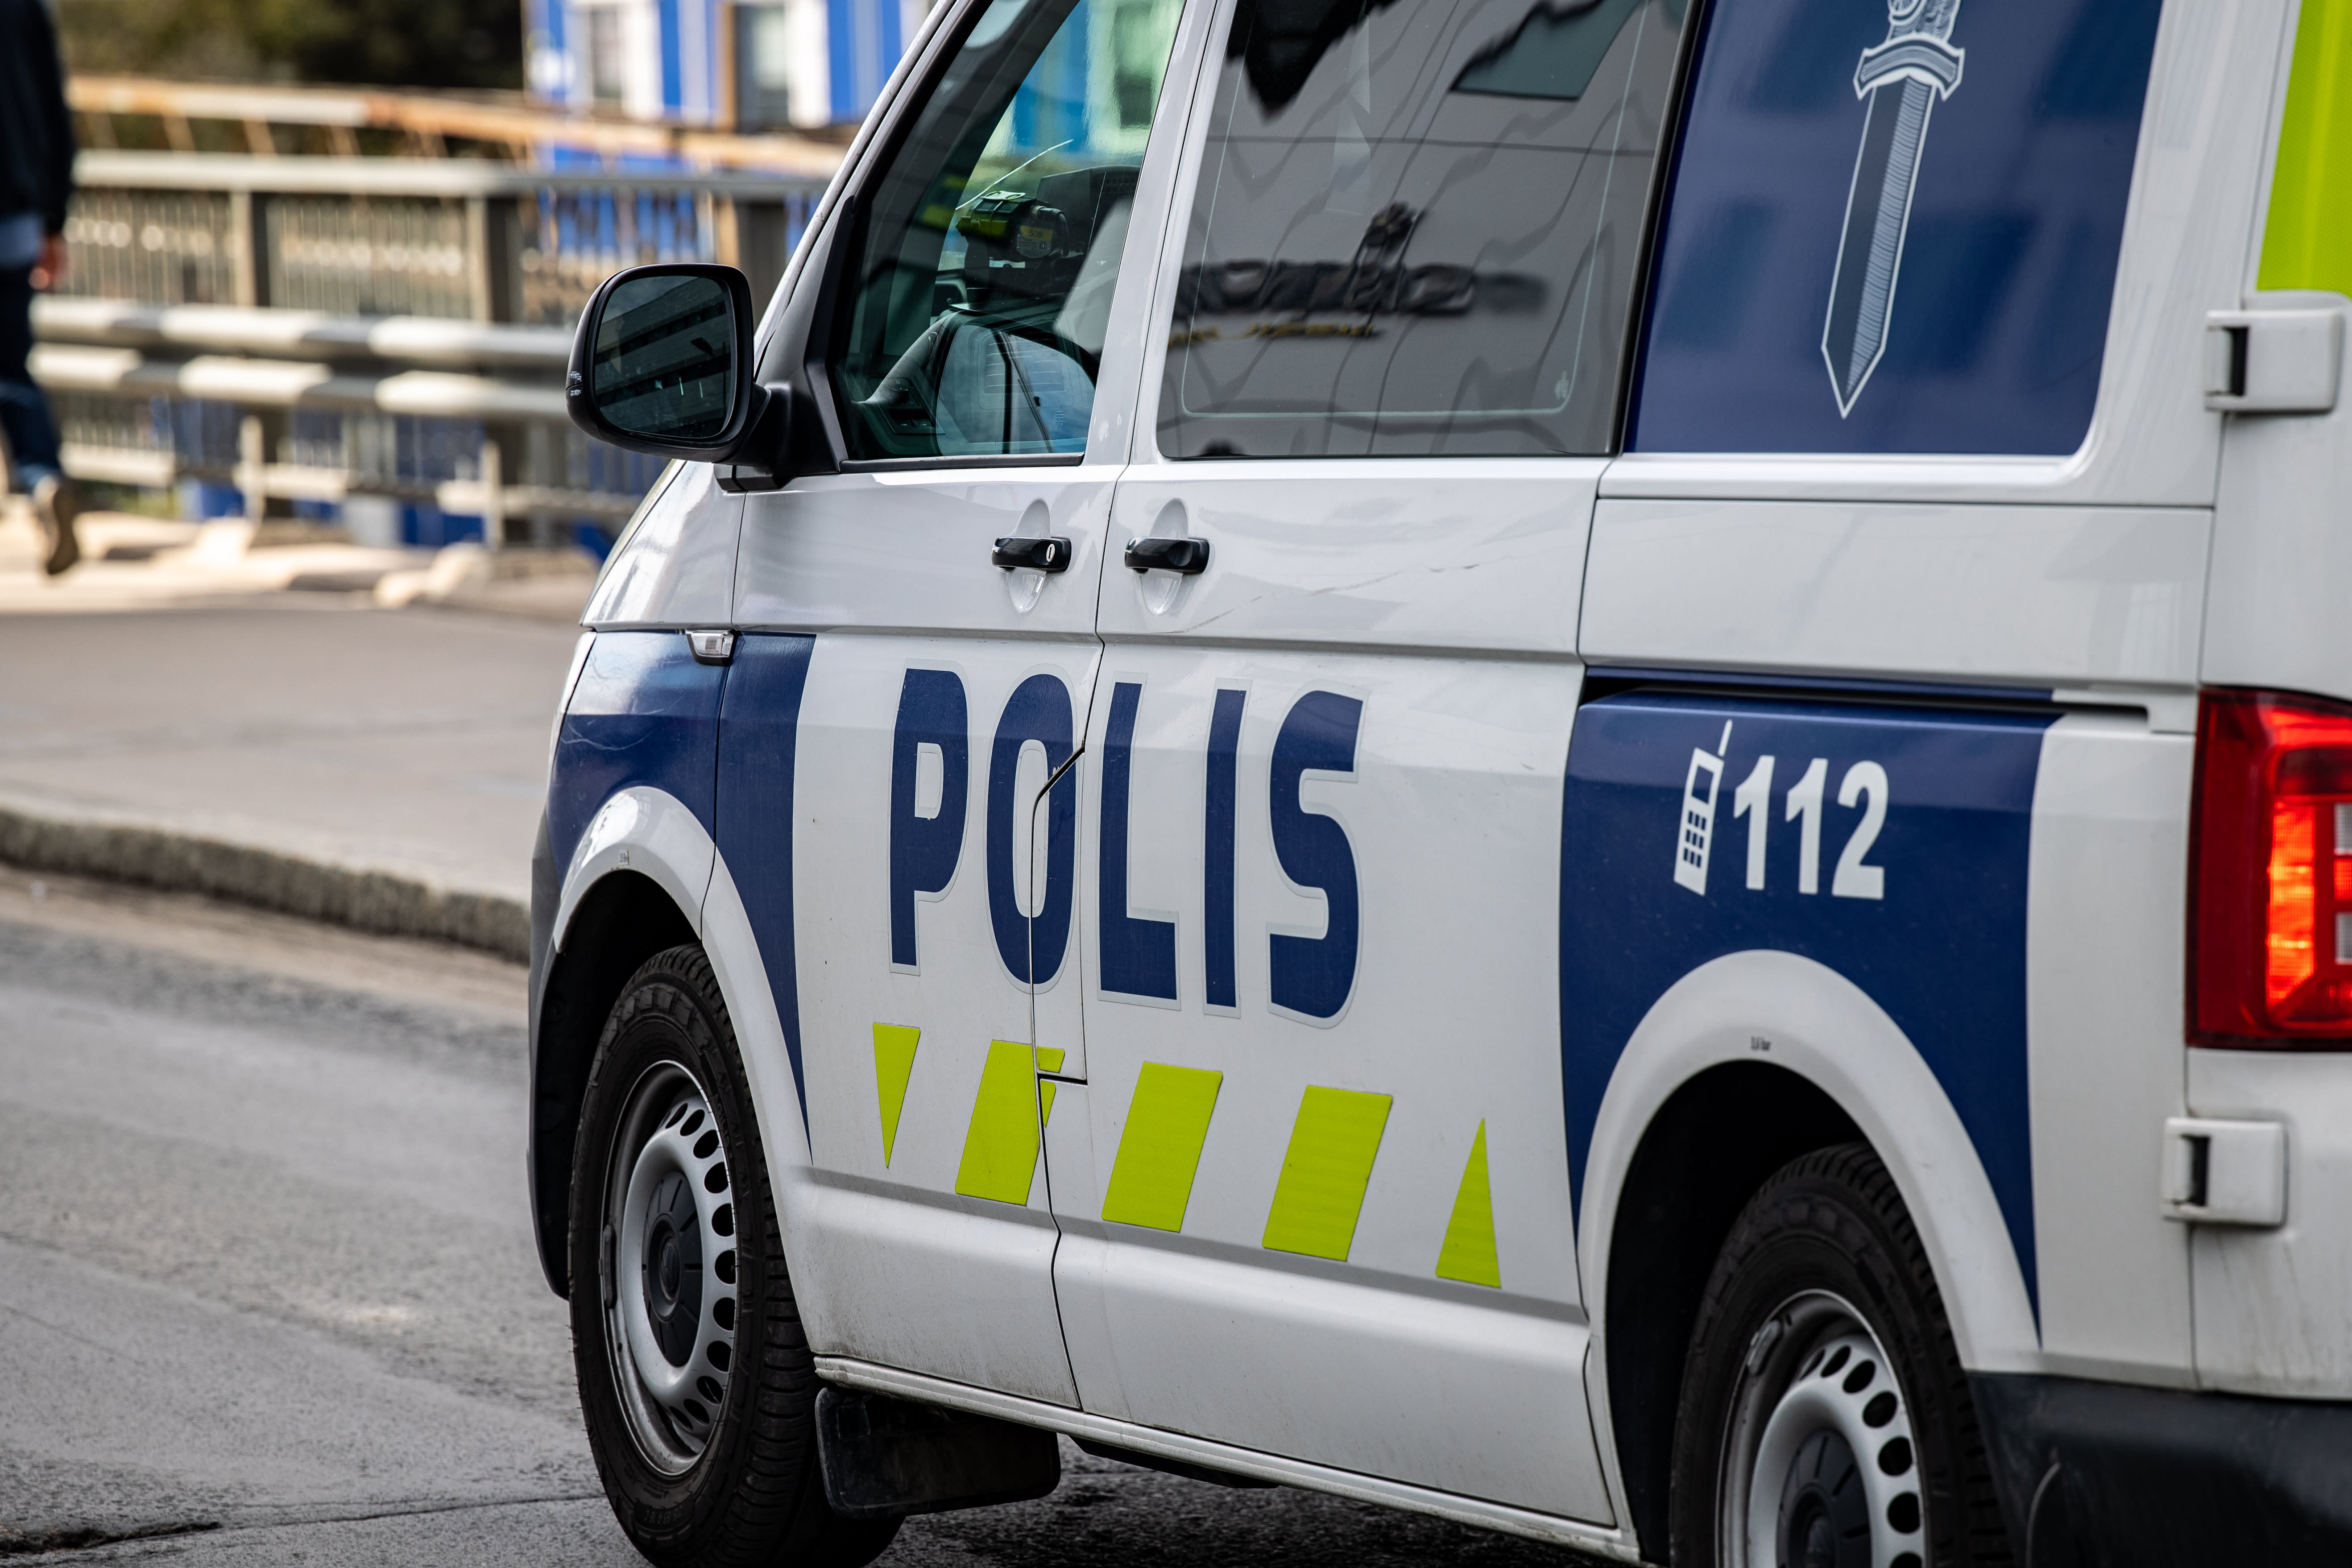 The Finnish police suspect a man of animal welfare crimes after transporting the dog that led to his death from Russia